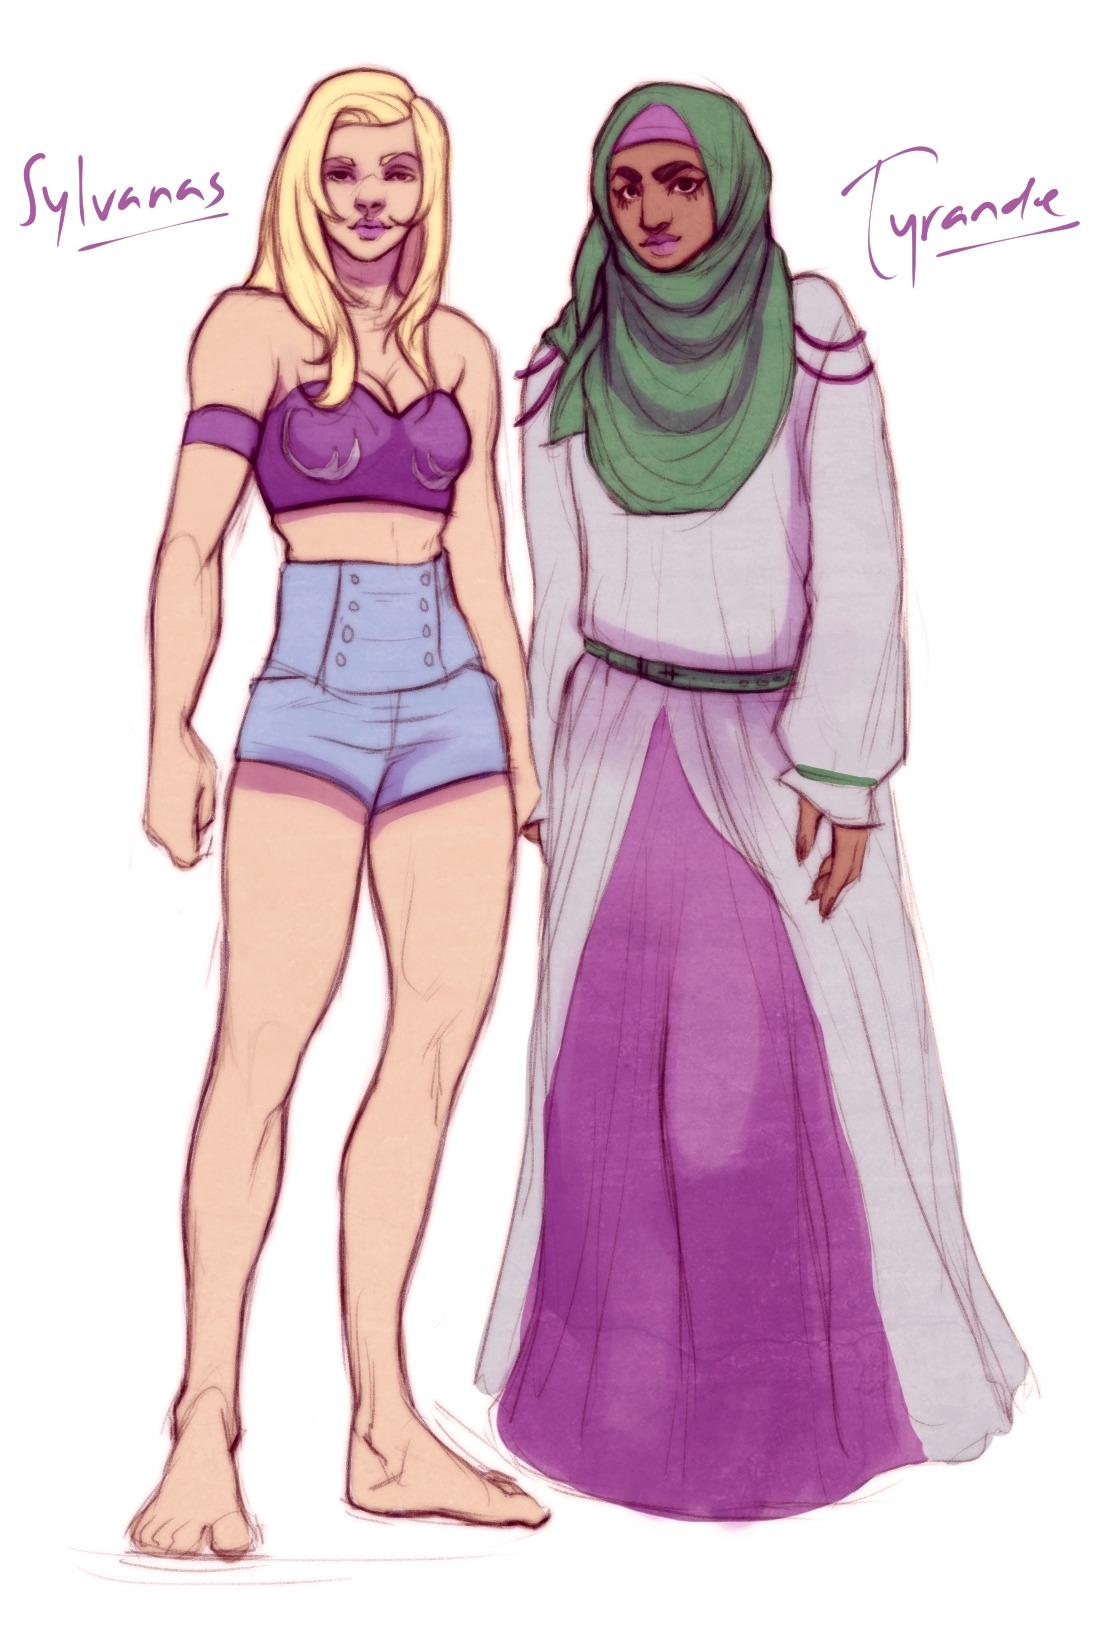 who run the street? TRANS SYLVANAS AND HER DELICATE MUSLIM GIRLFRIEND.
and they’re hot.